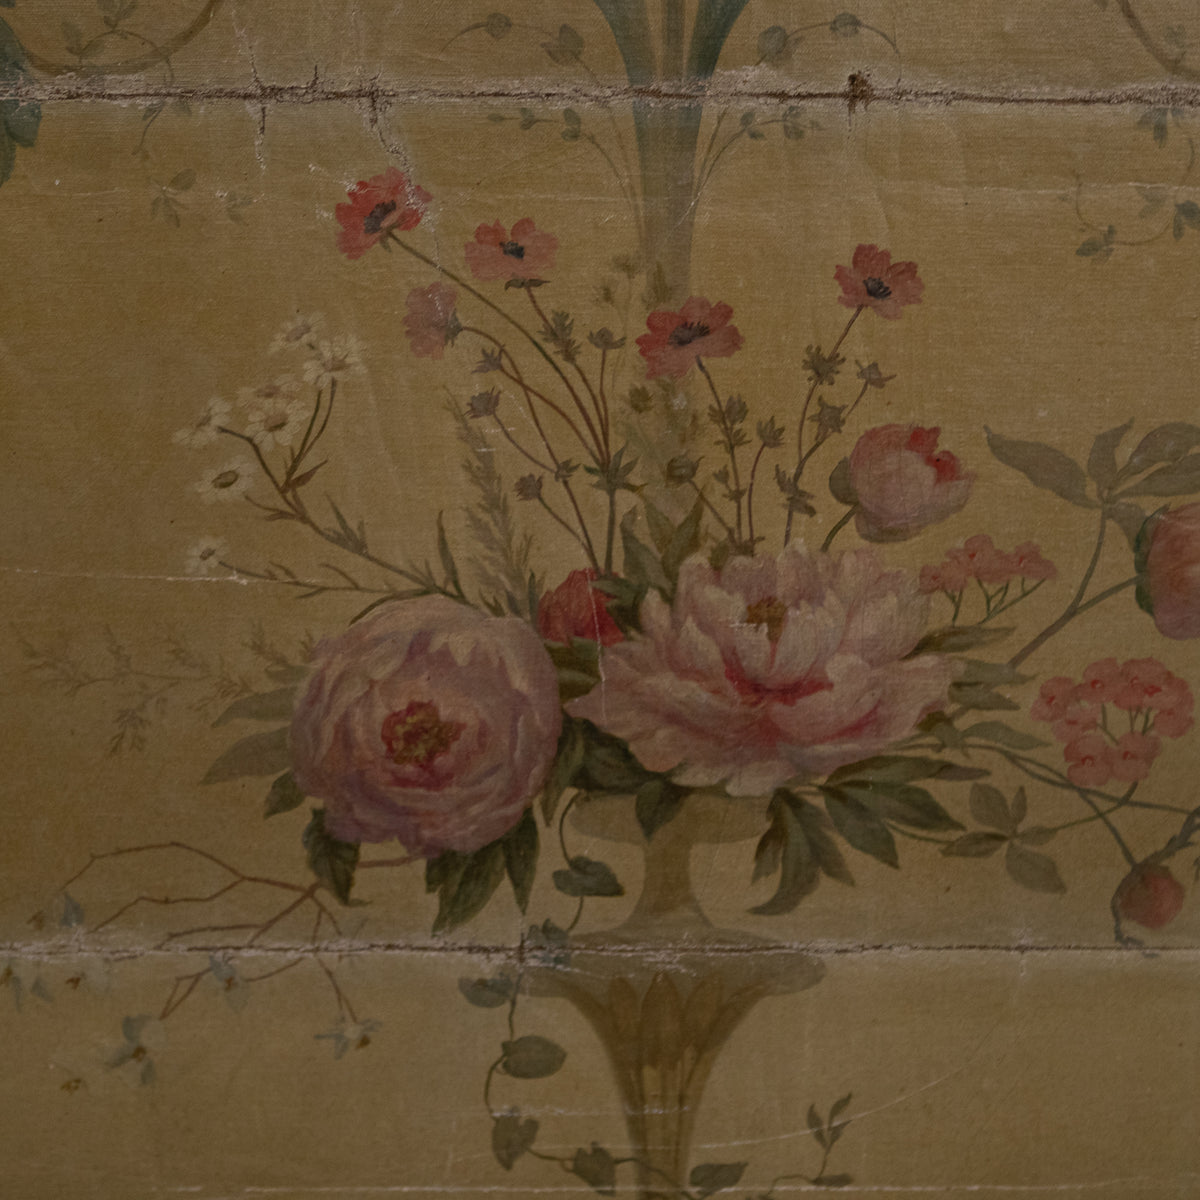 Magnificent Collection of Antique 18th Century Oil on Canvas Murals | The Architectural Forum